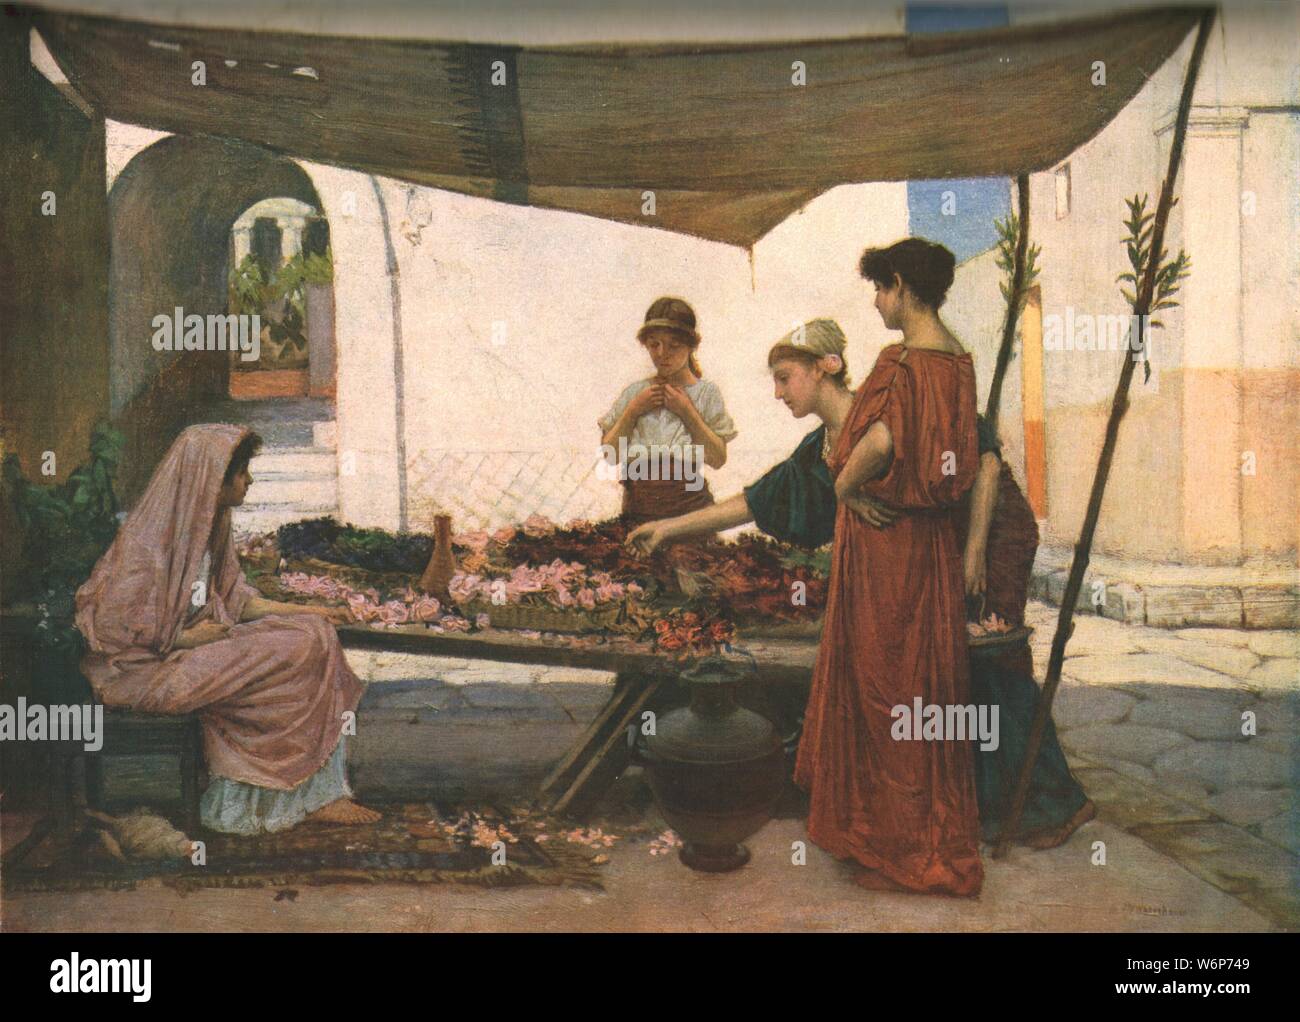 'A Grecian Flower Market', c1880, (c1930). Scene in Ancient Greece: women at a stall selling flowers. Painting in the Laing Art Gallery, Newcastle upon Tyne, Tyne &amp; Wear. From &quot;Modern Masterpieces of British Art&quot;. [The Amalgamated Press Ltd., London, c1930] Stock Photo